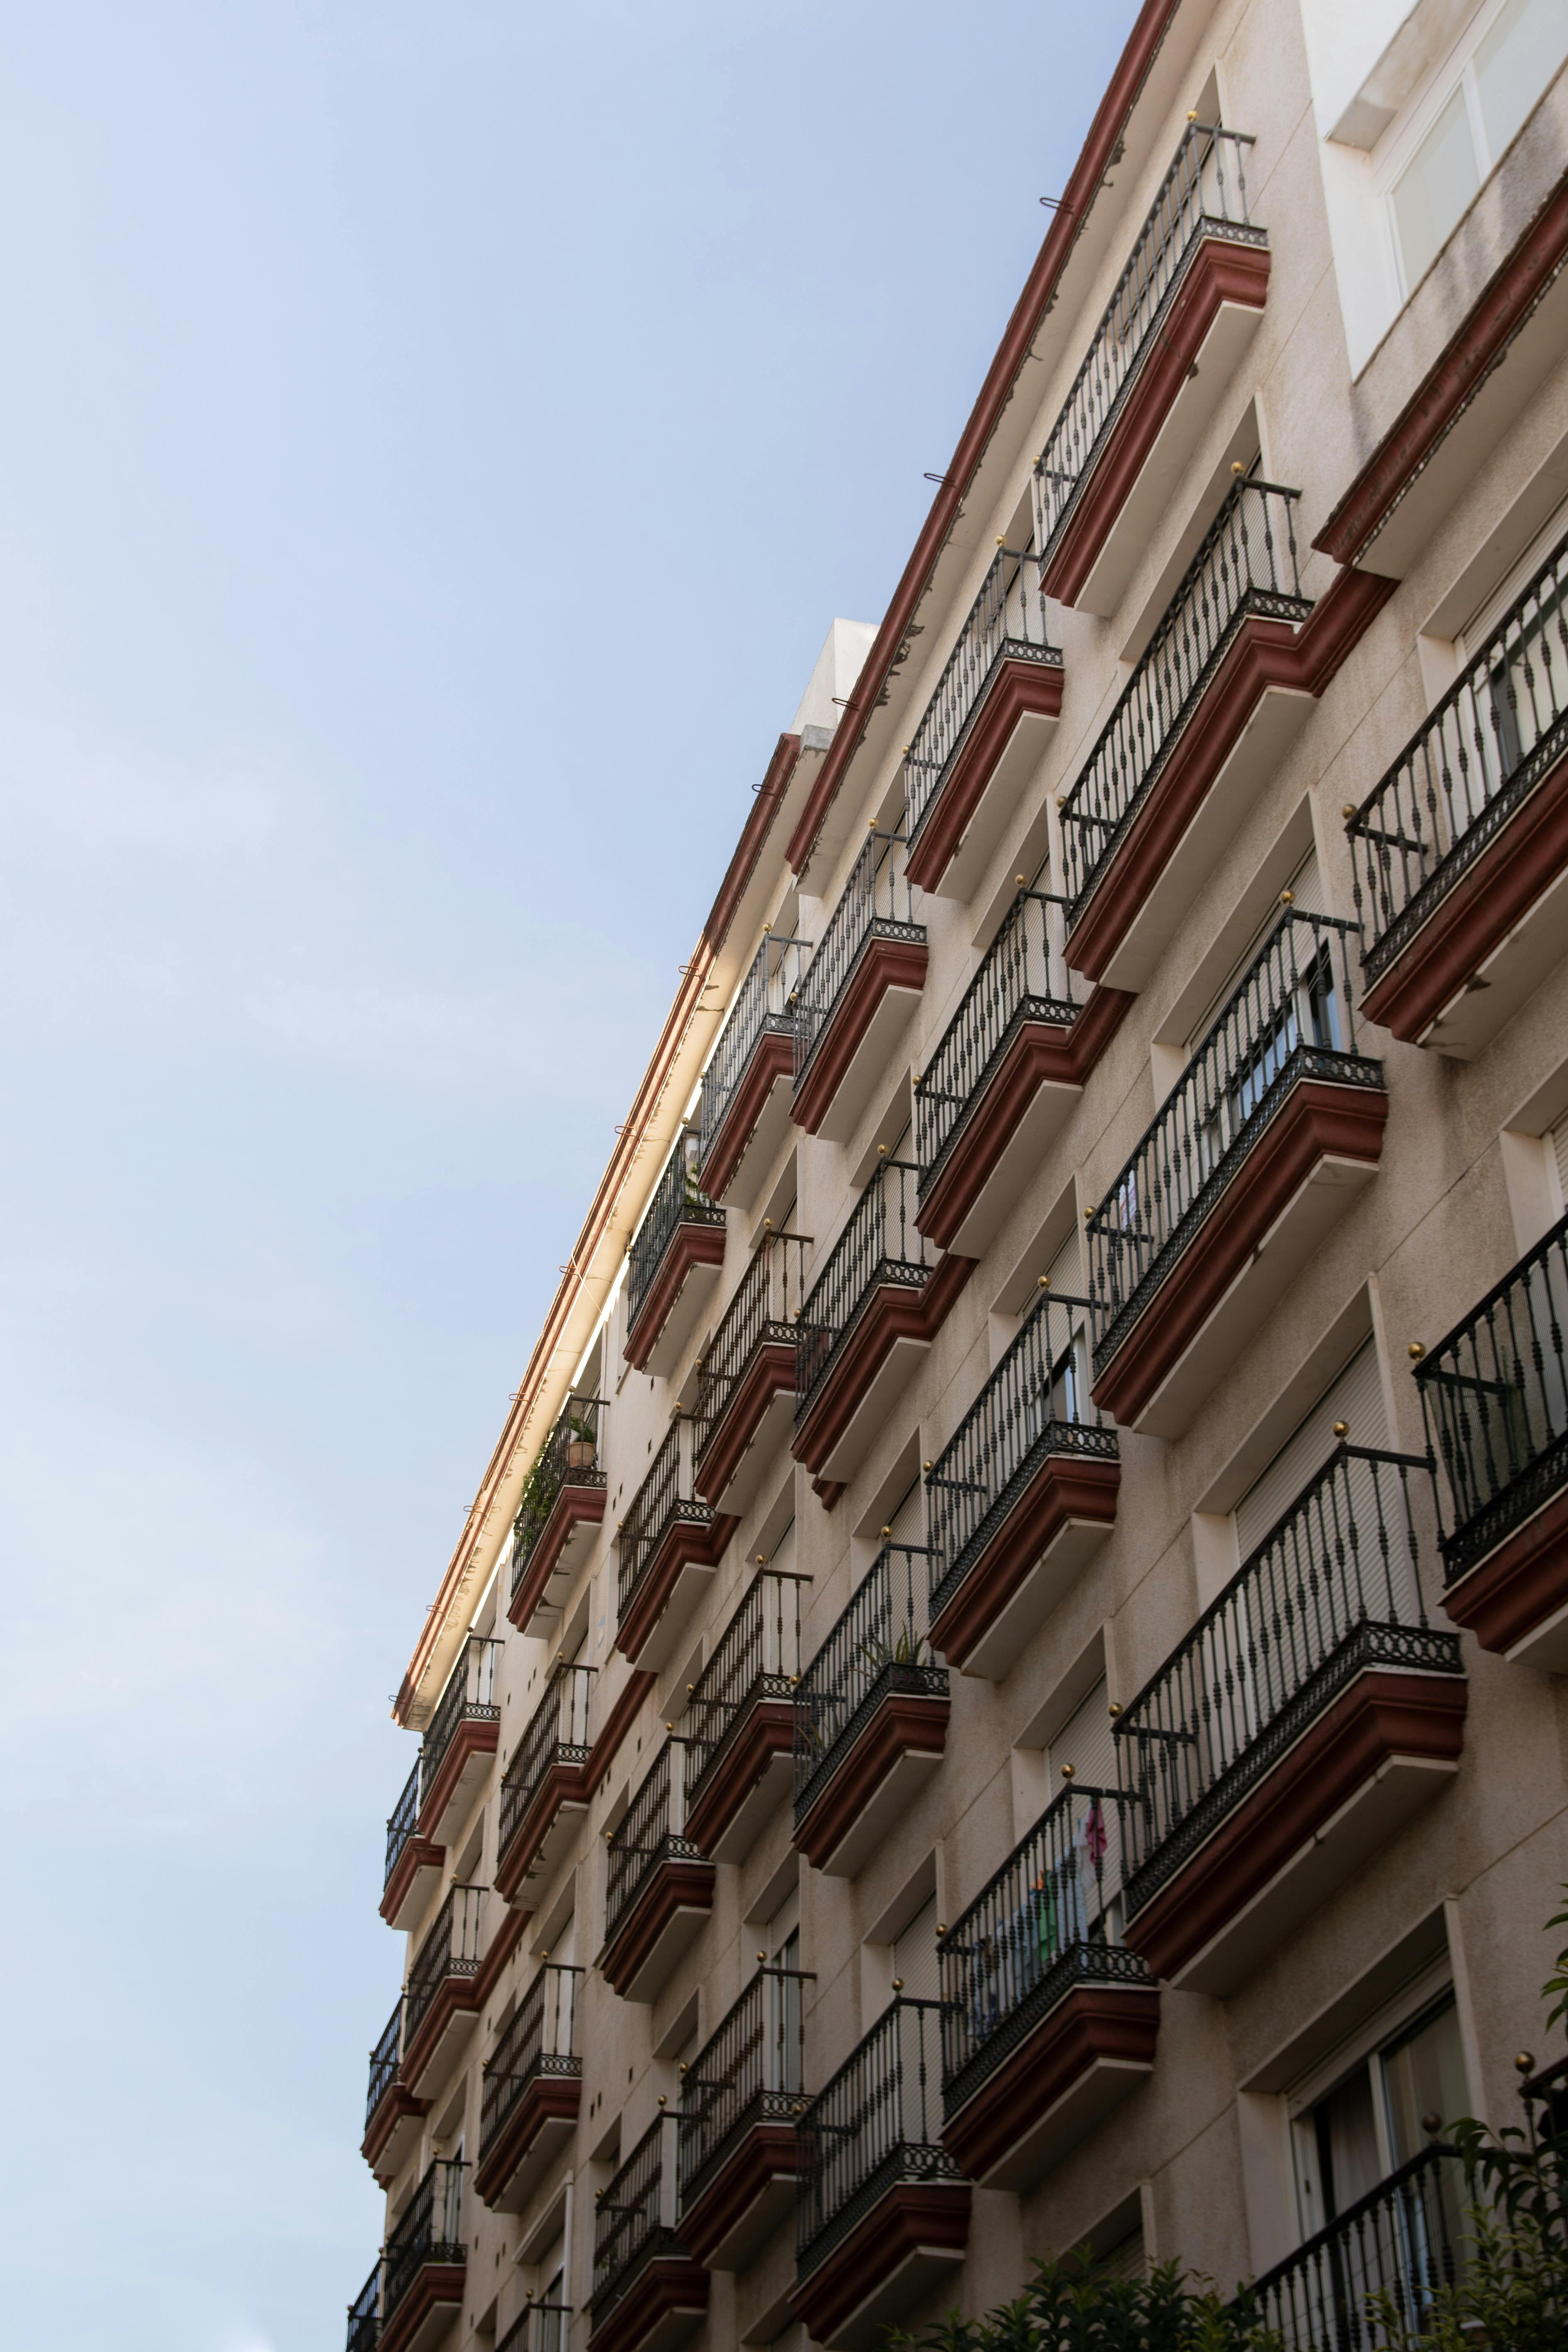 Photo of an Apartment Building · Free Stock Photo